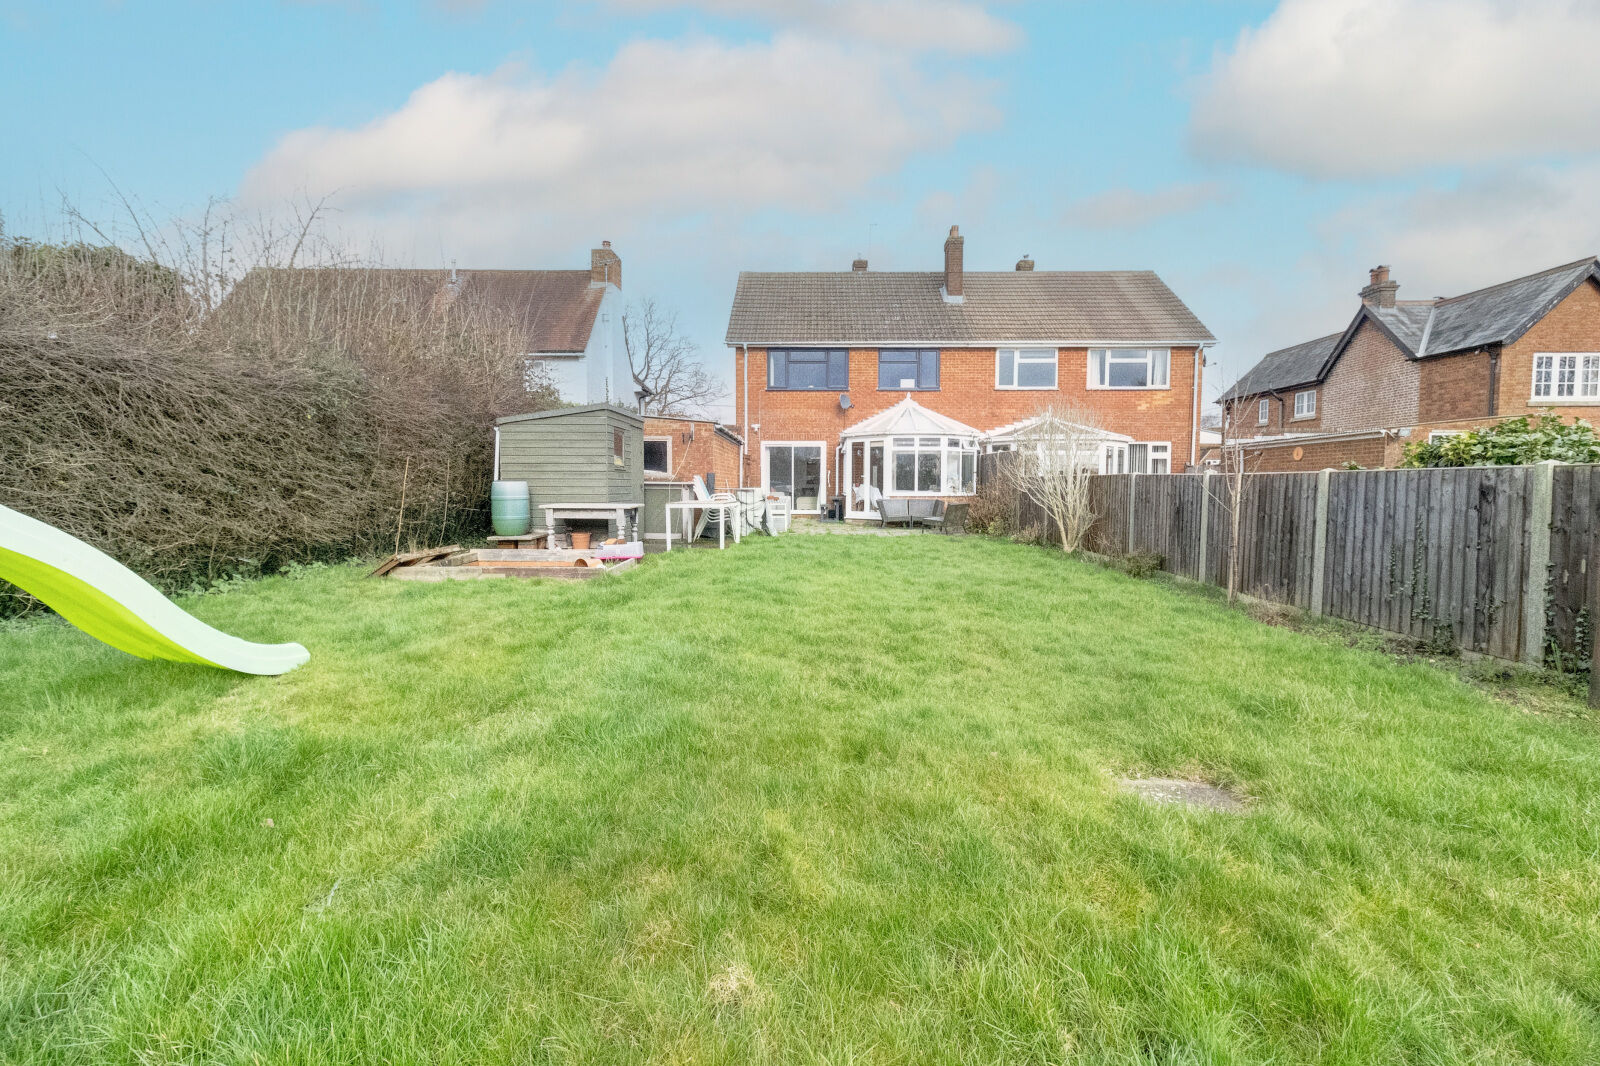 3 bedroom semi detached house for sale Sheepcote Dell Road, Holmer Green, HP15, main image